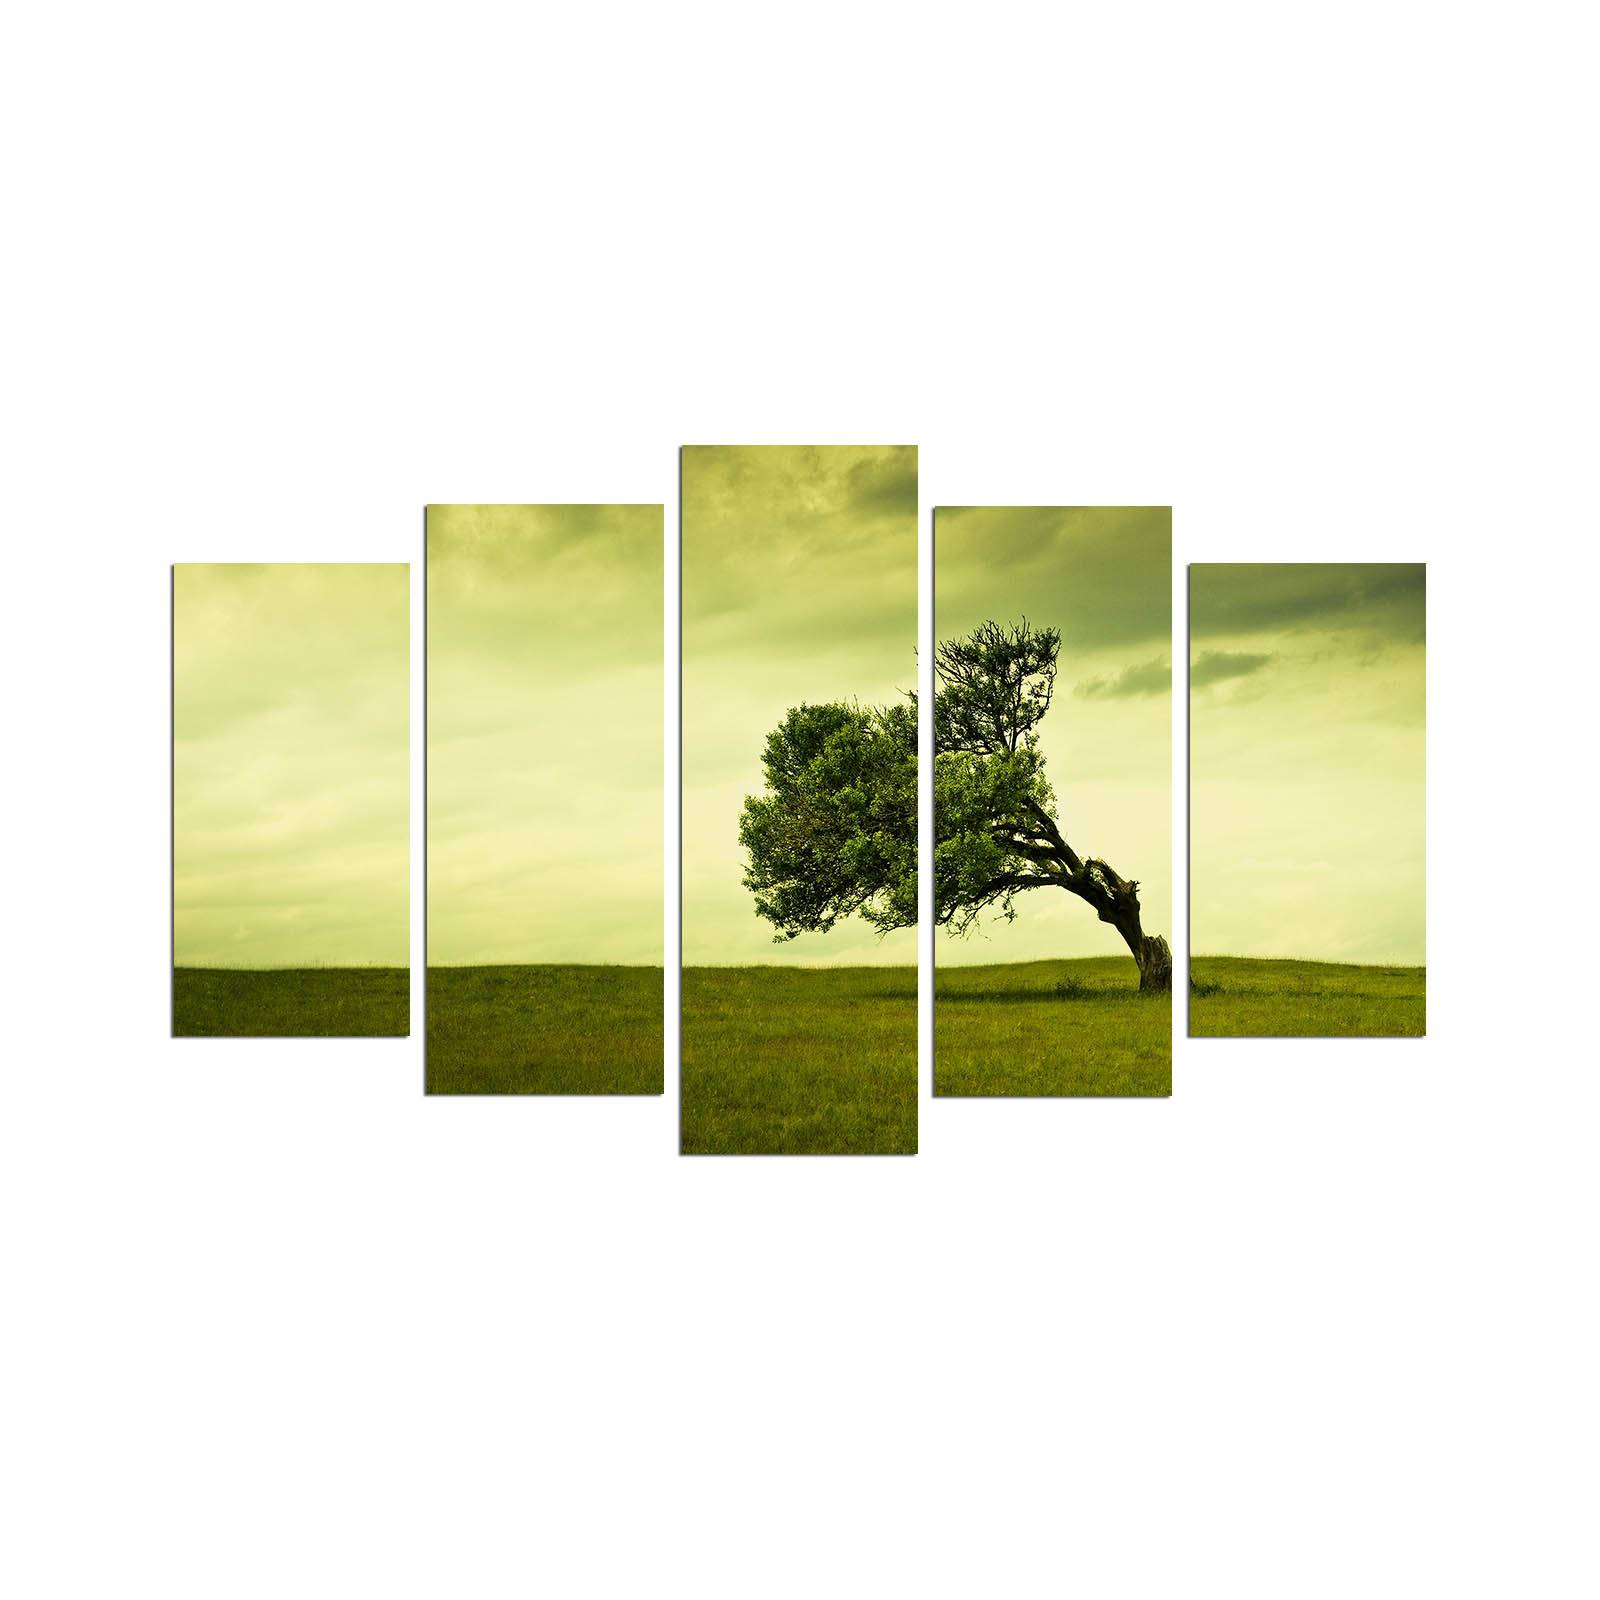 Pentaptychon Grex Leaning Tree Pattern Shades of Green